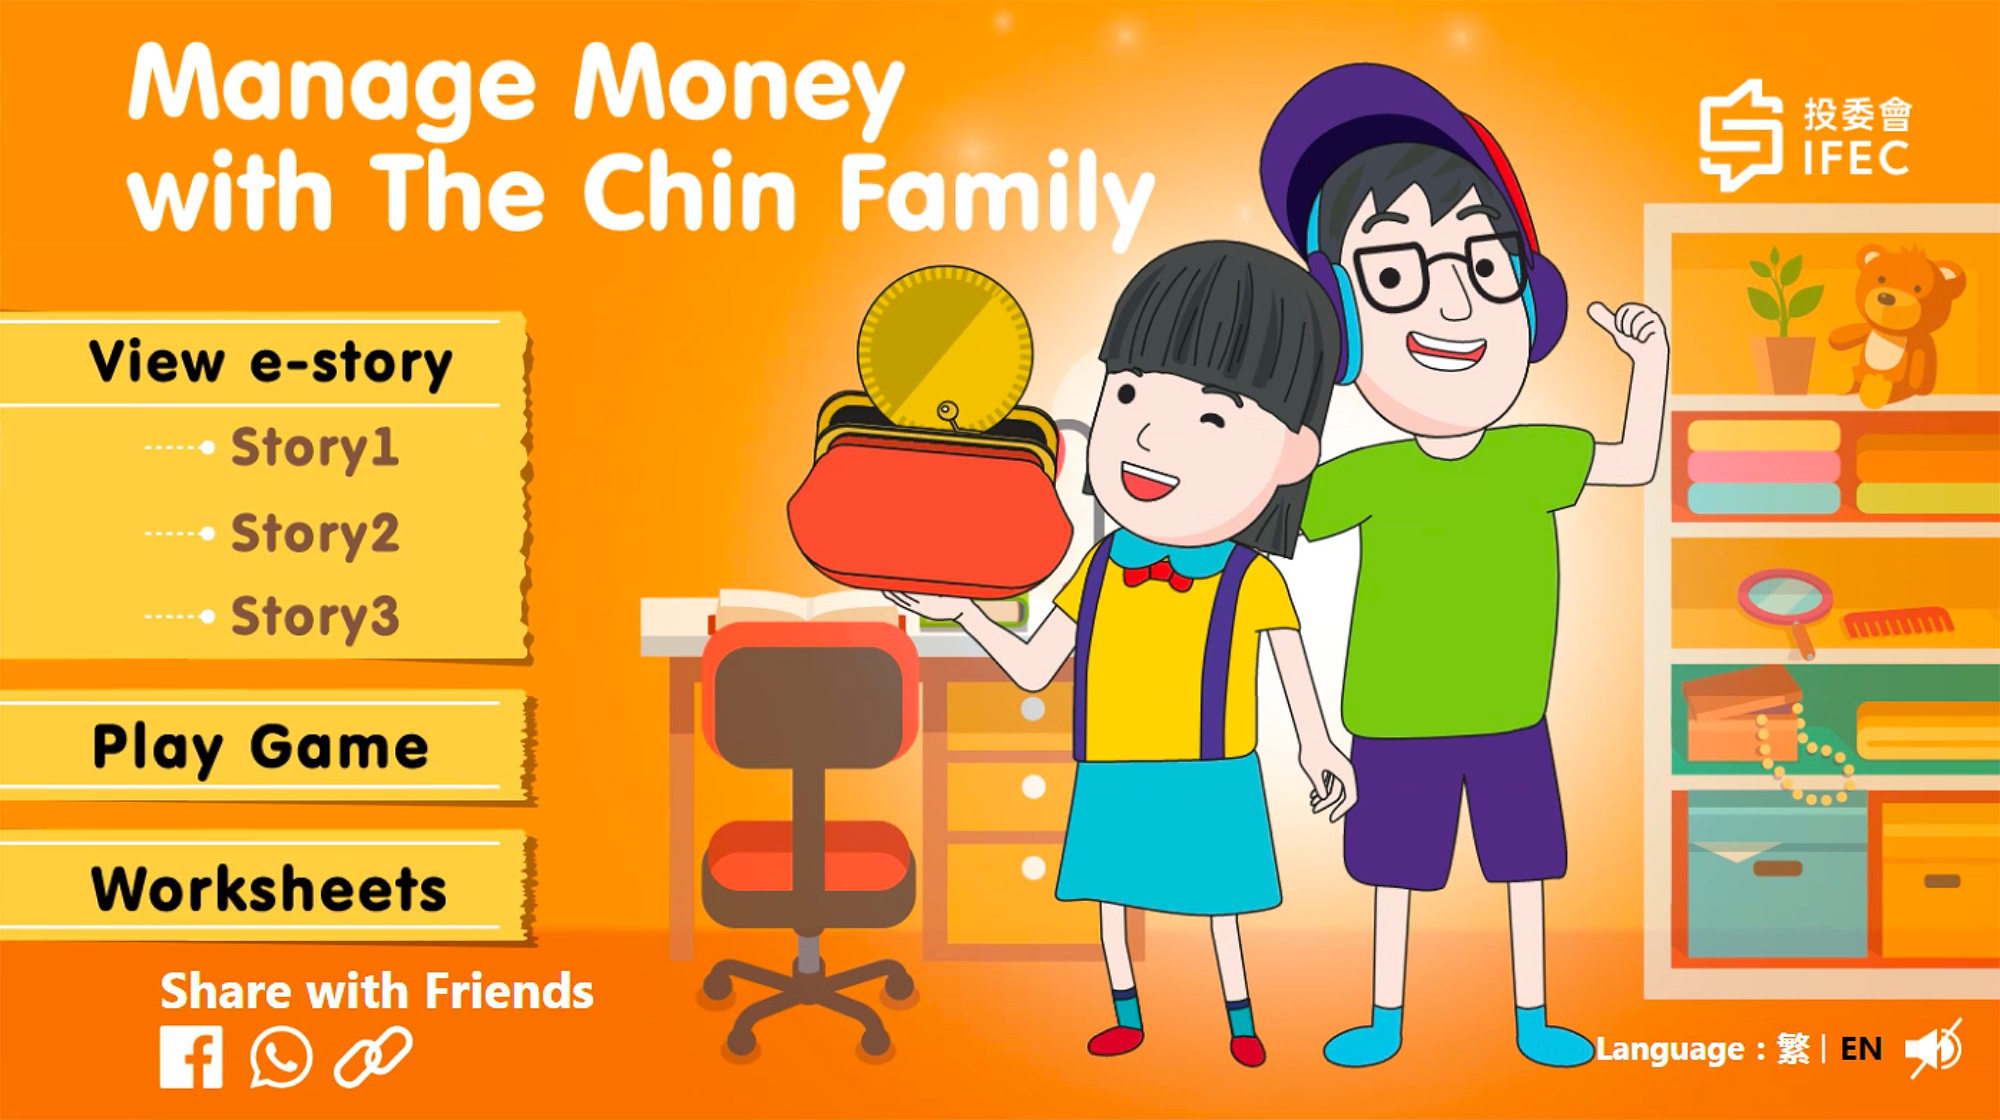 e-story: Manage Money with The Chin Family 